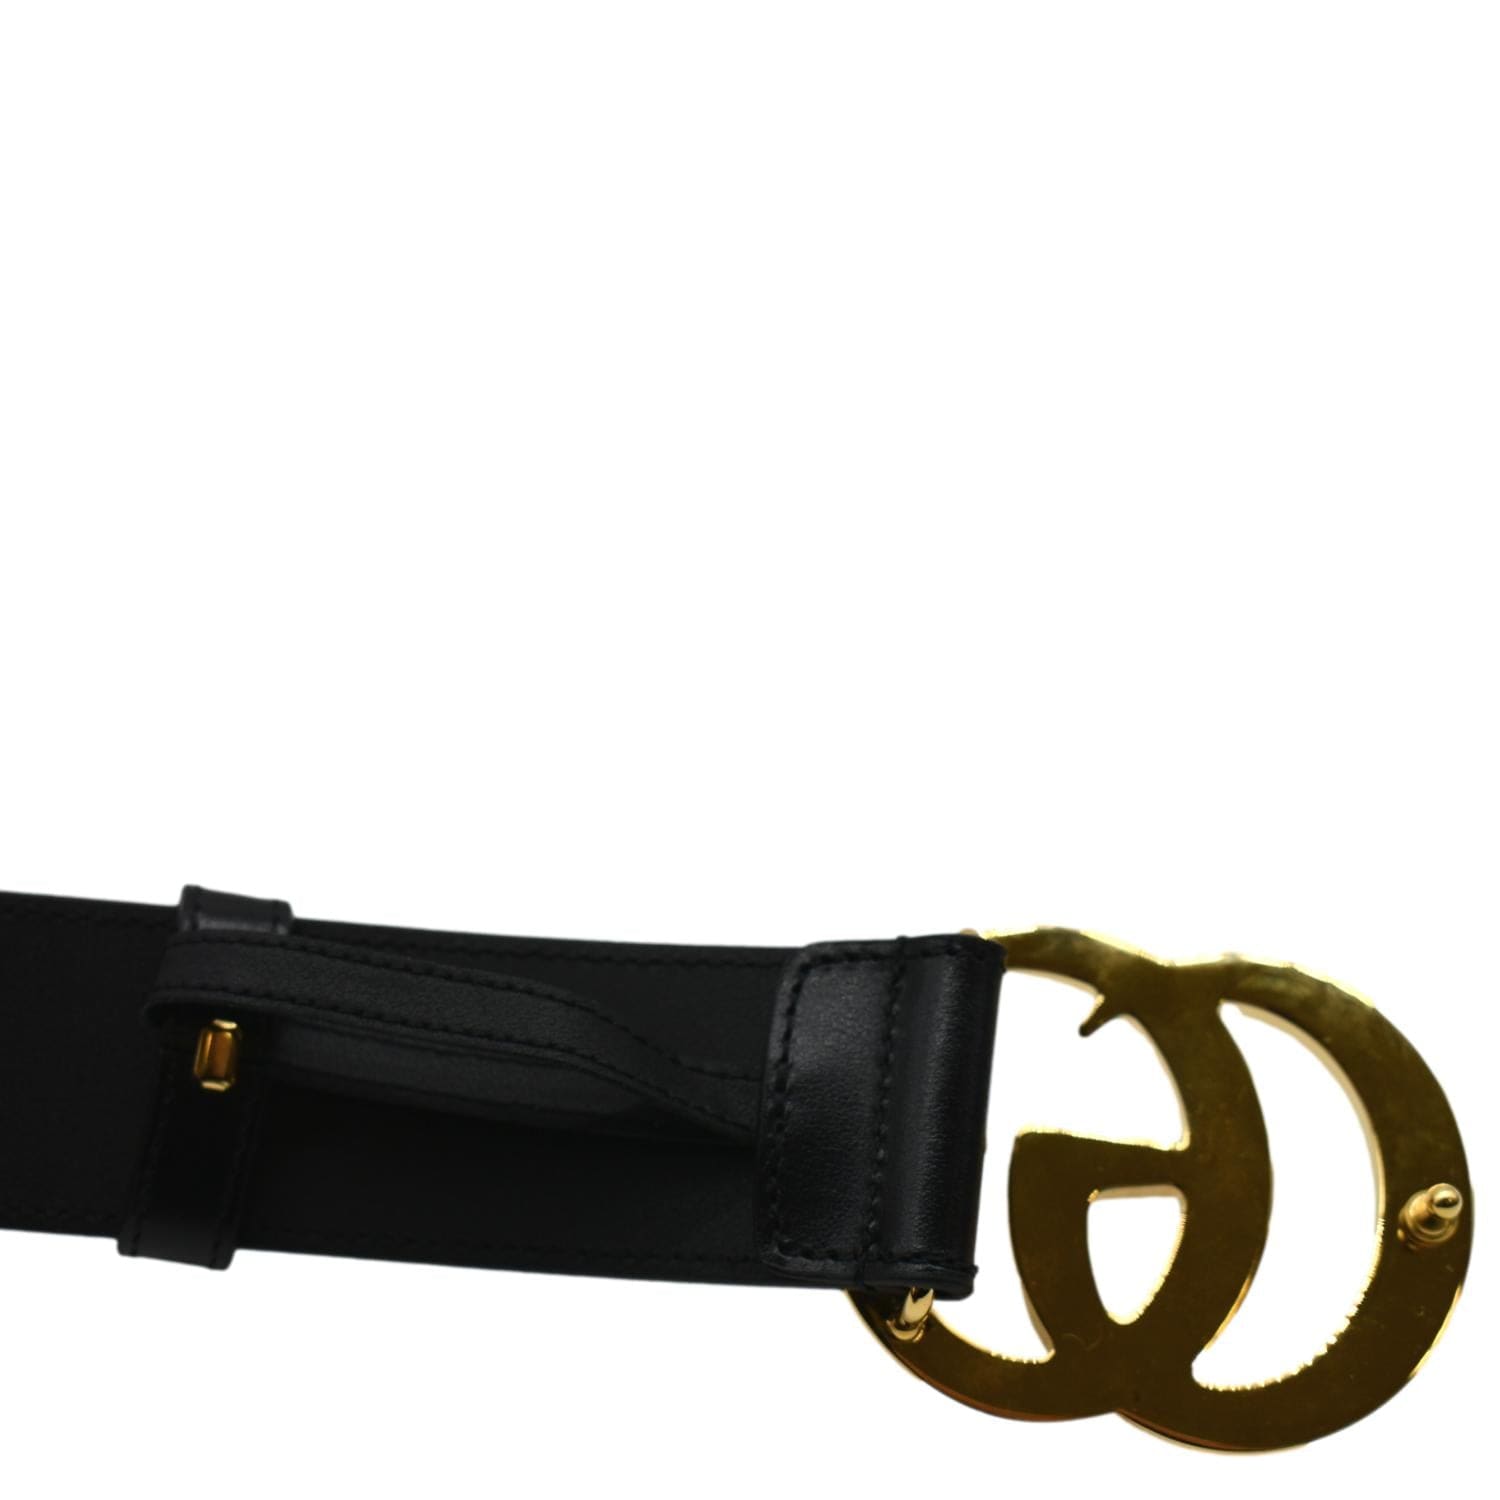 Gg buckle leather belt Gucci Black size 85 cm in Leather - 35104564